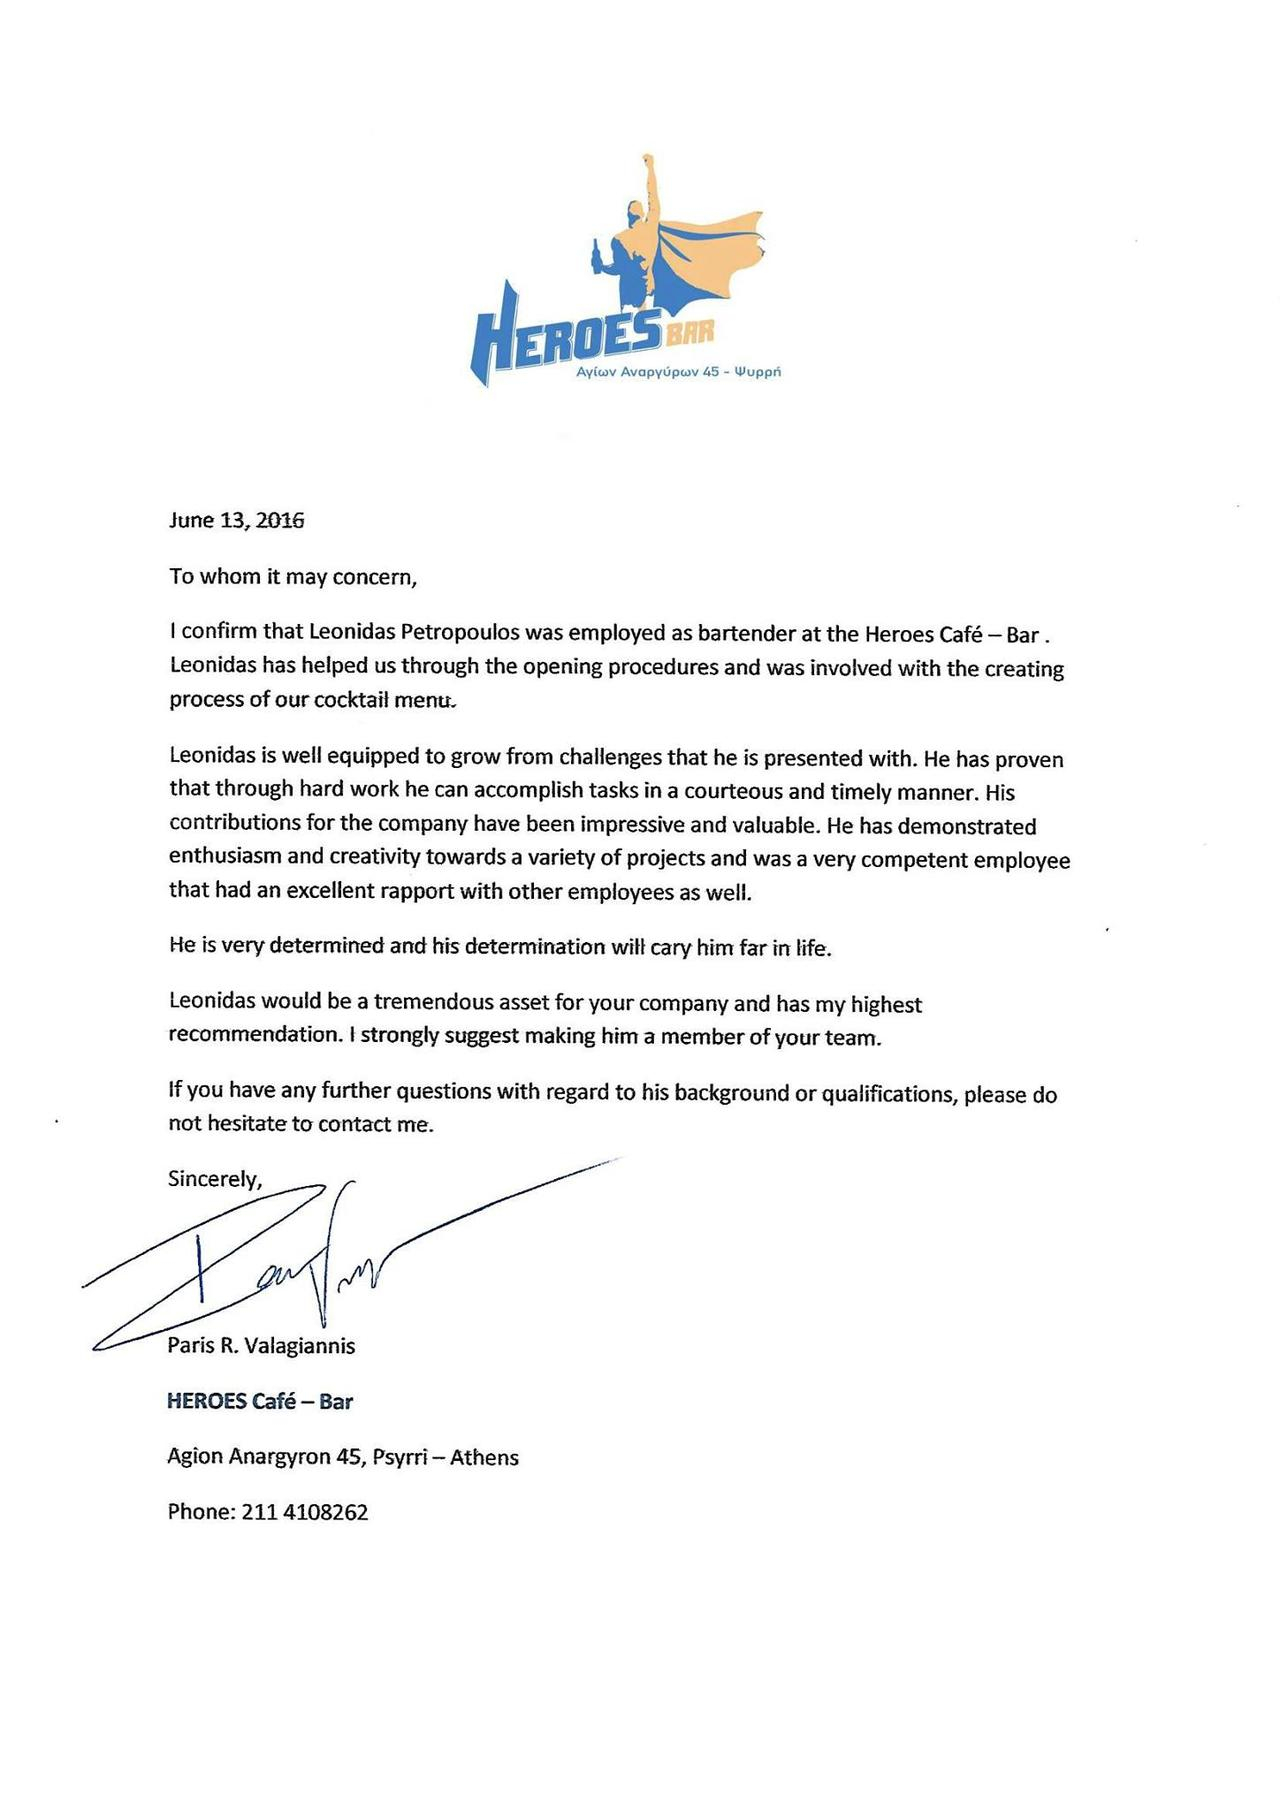 Recommendation Letter From Heroes Bar Harri in dimensions 1280 X 1810